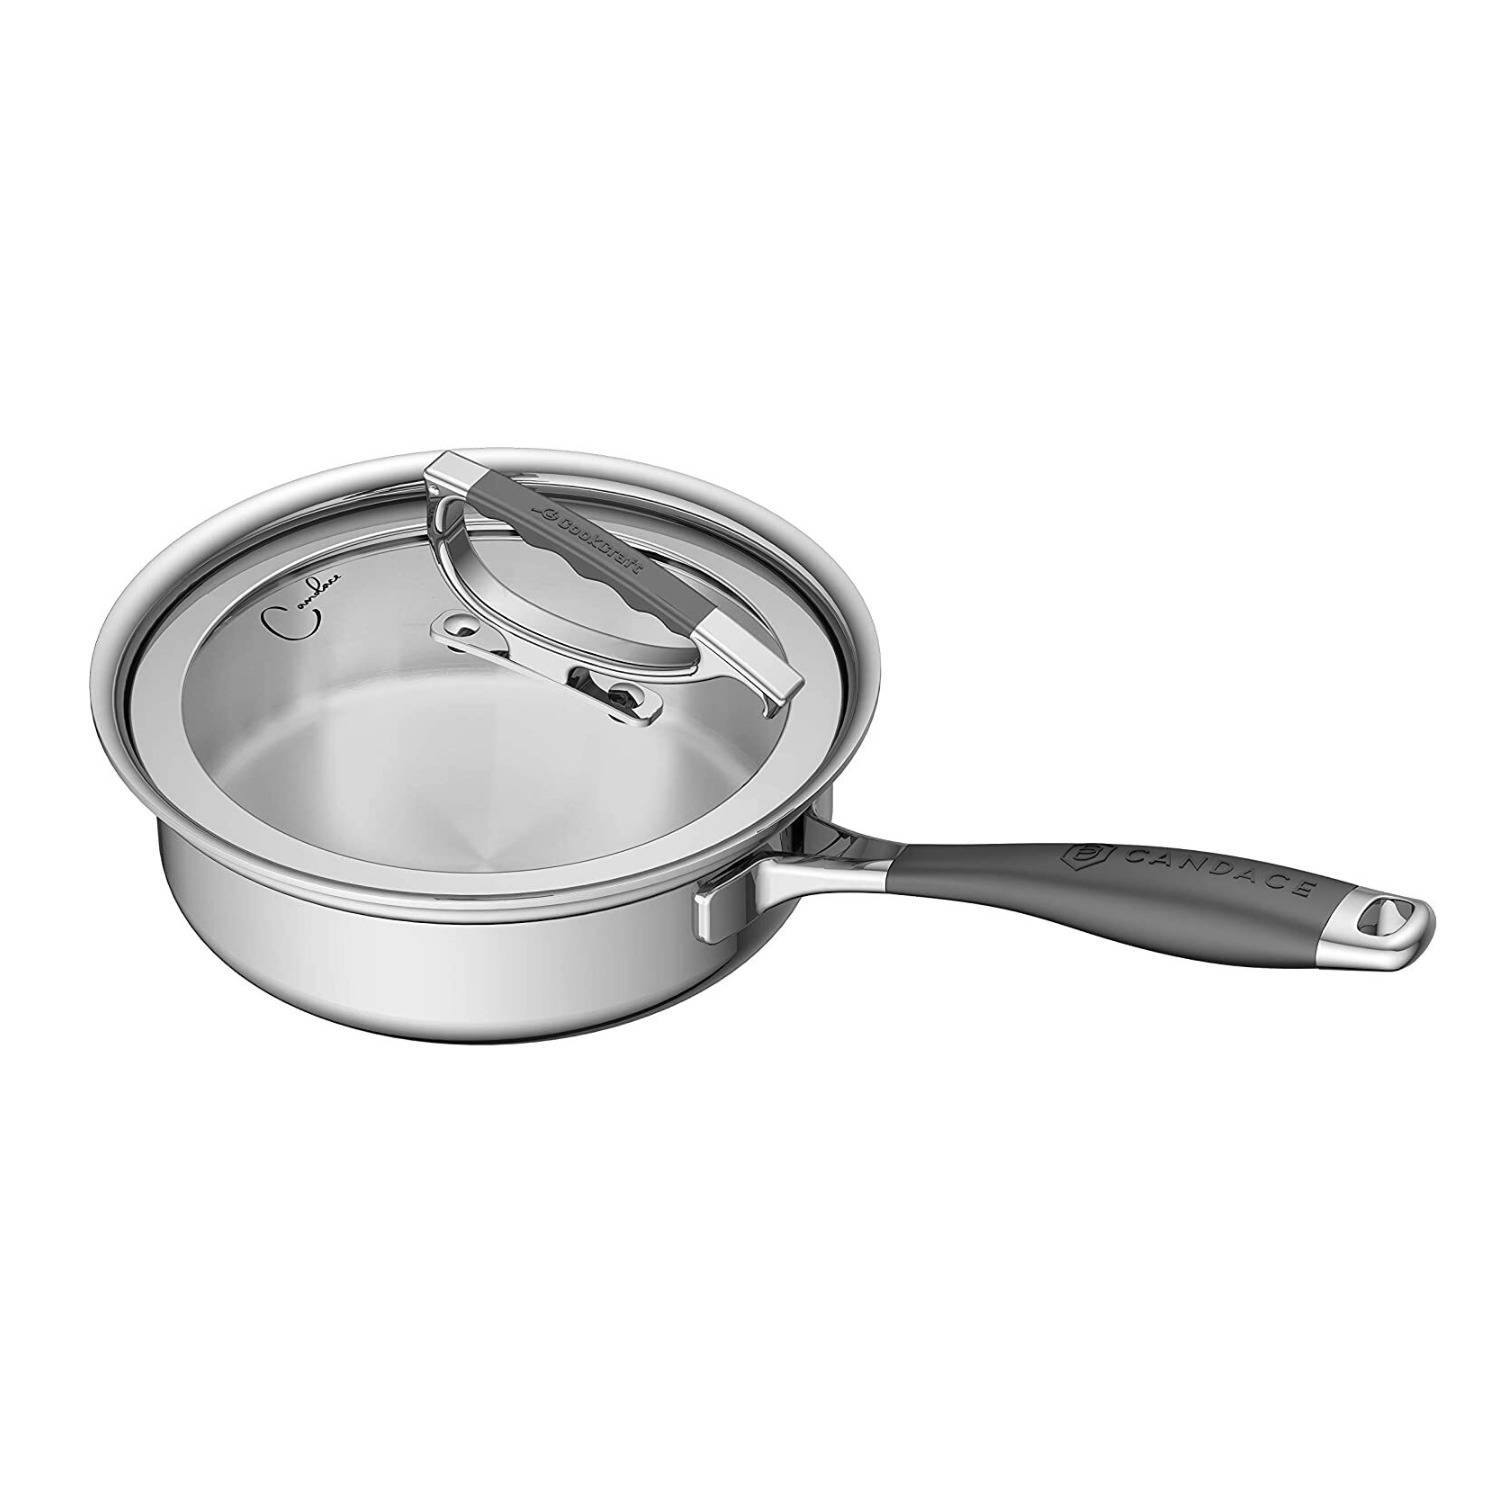 CookCraft  8-Inch Tri-Ply Stainless Steel Saute Pan